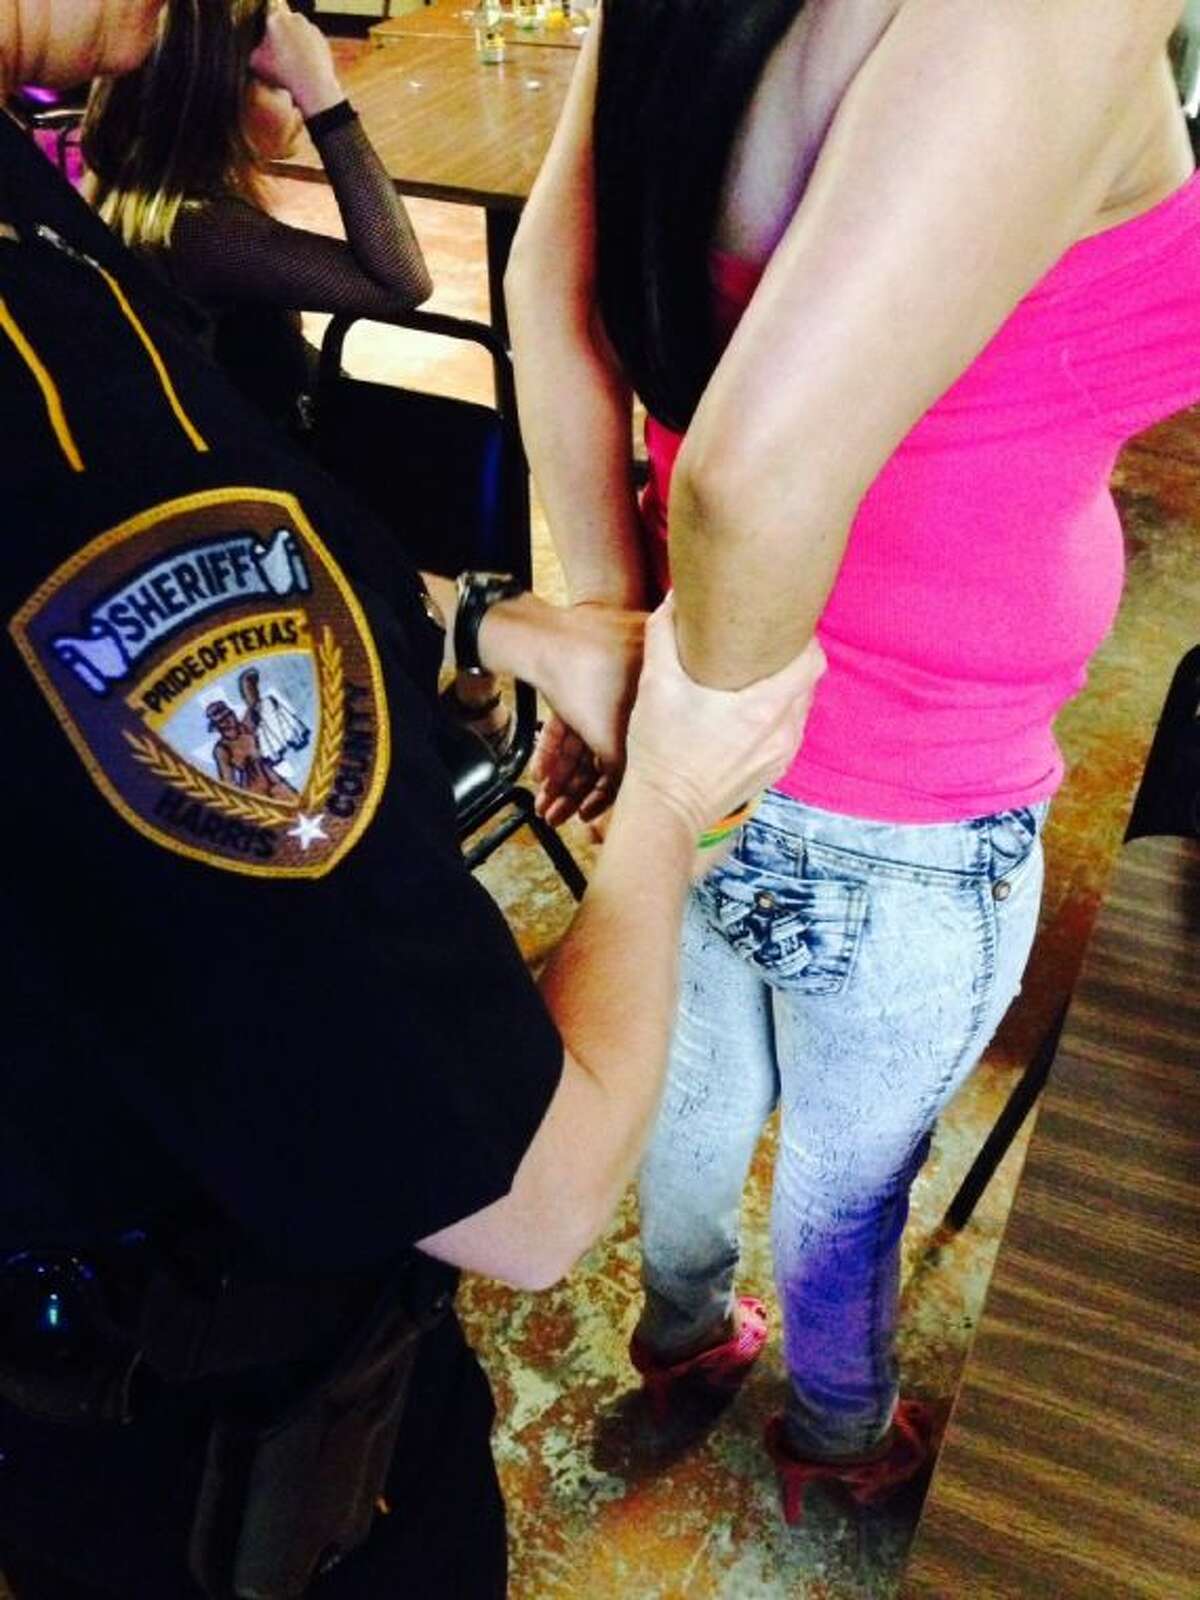 Prostitution Sting At East Harris County Cantinas Net Over Dozen Arrests 4422